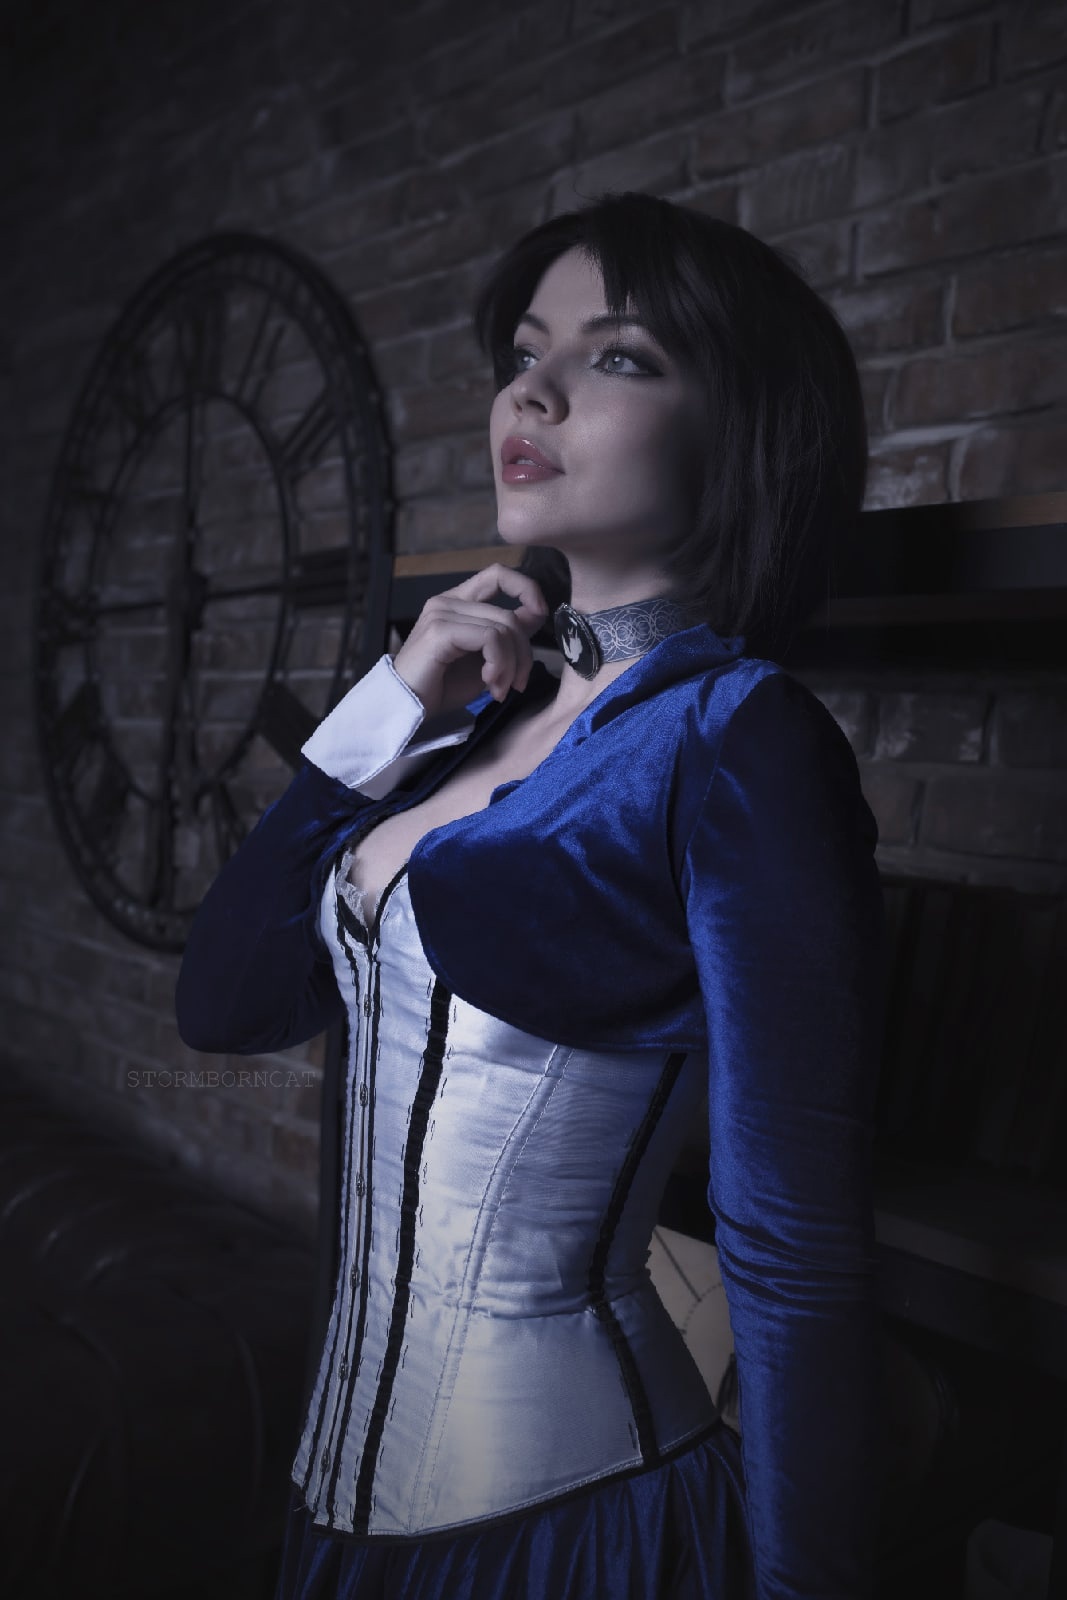 Cosplay on Elizabeth from the game Bioshock Infinite - My, Cosplay, Girls, Games, Computer games, Longpost, Stormborncat, Bioshock Infinite, Elizabeth